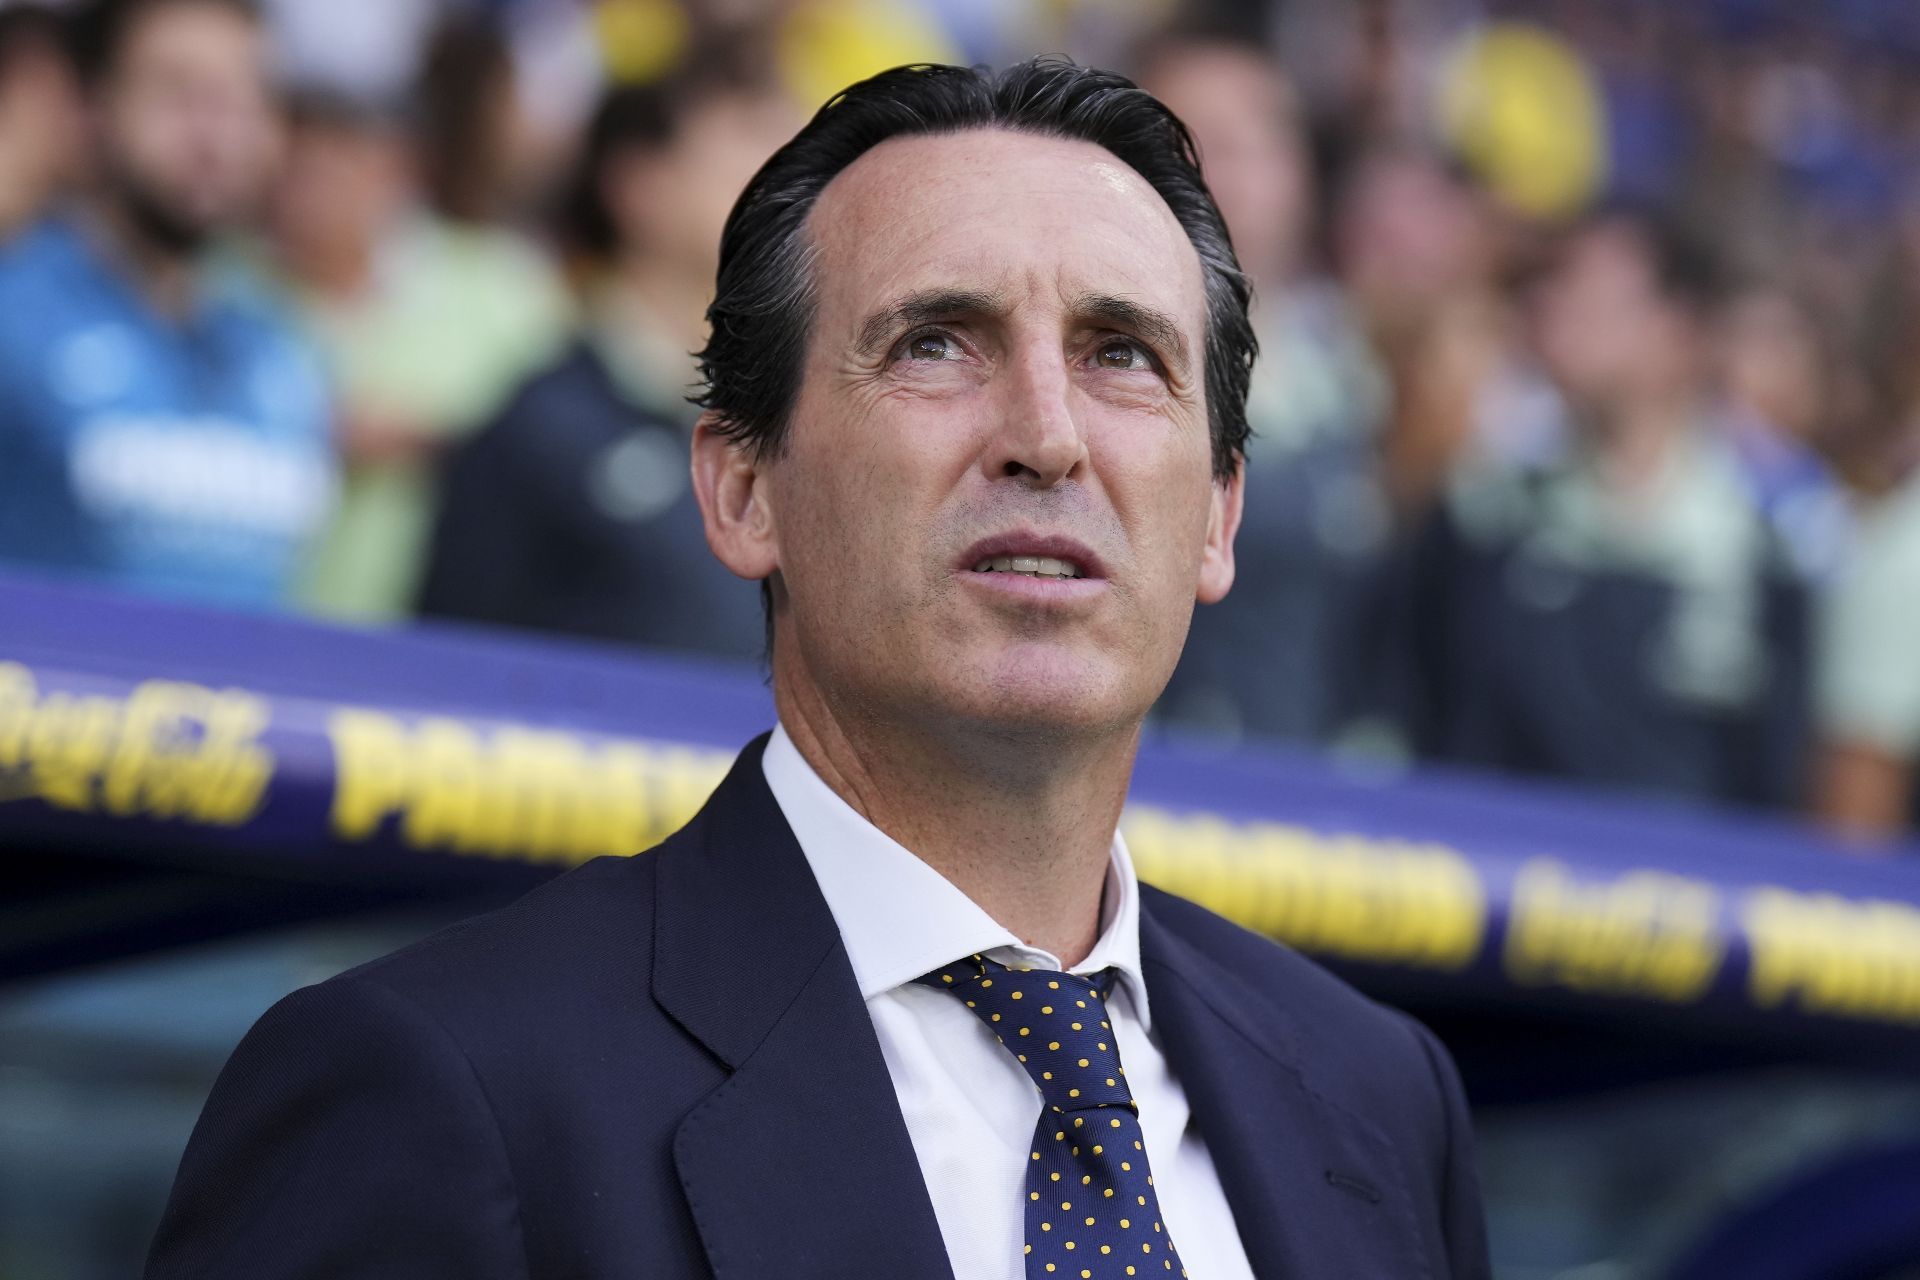 Emery is the new Villains boss